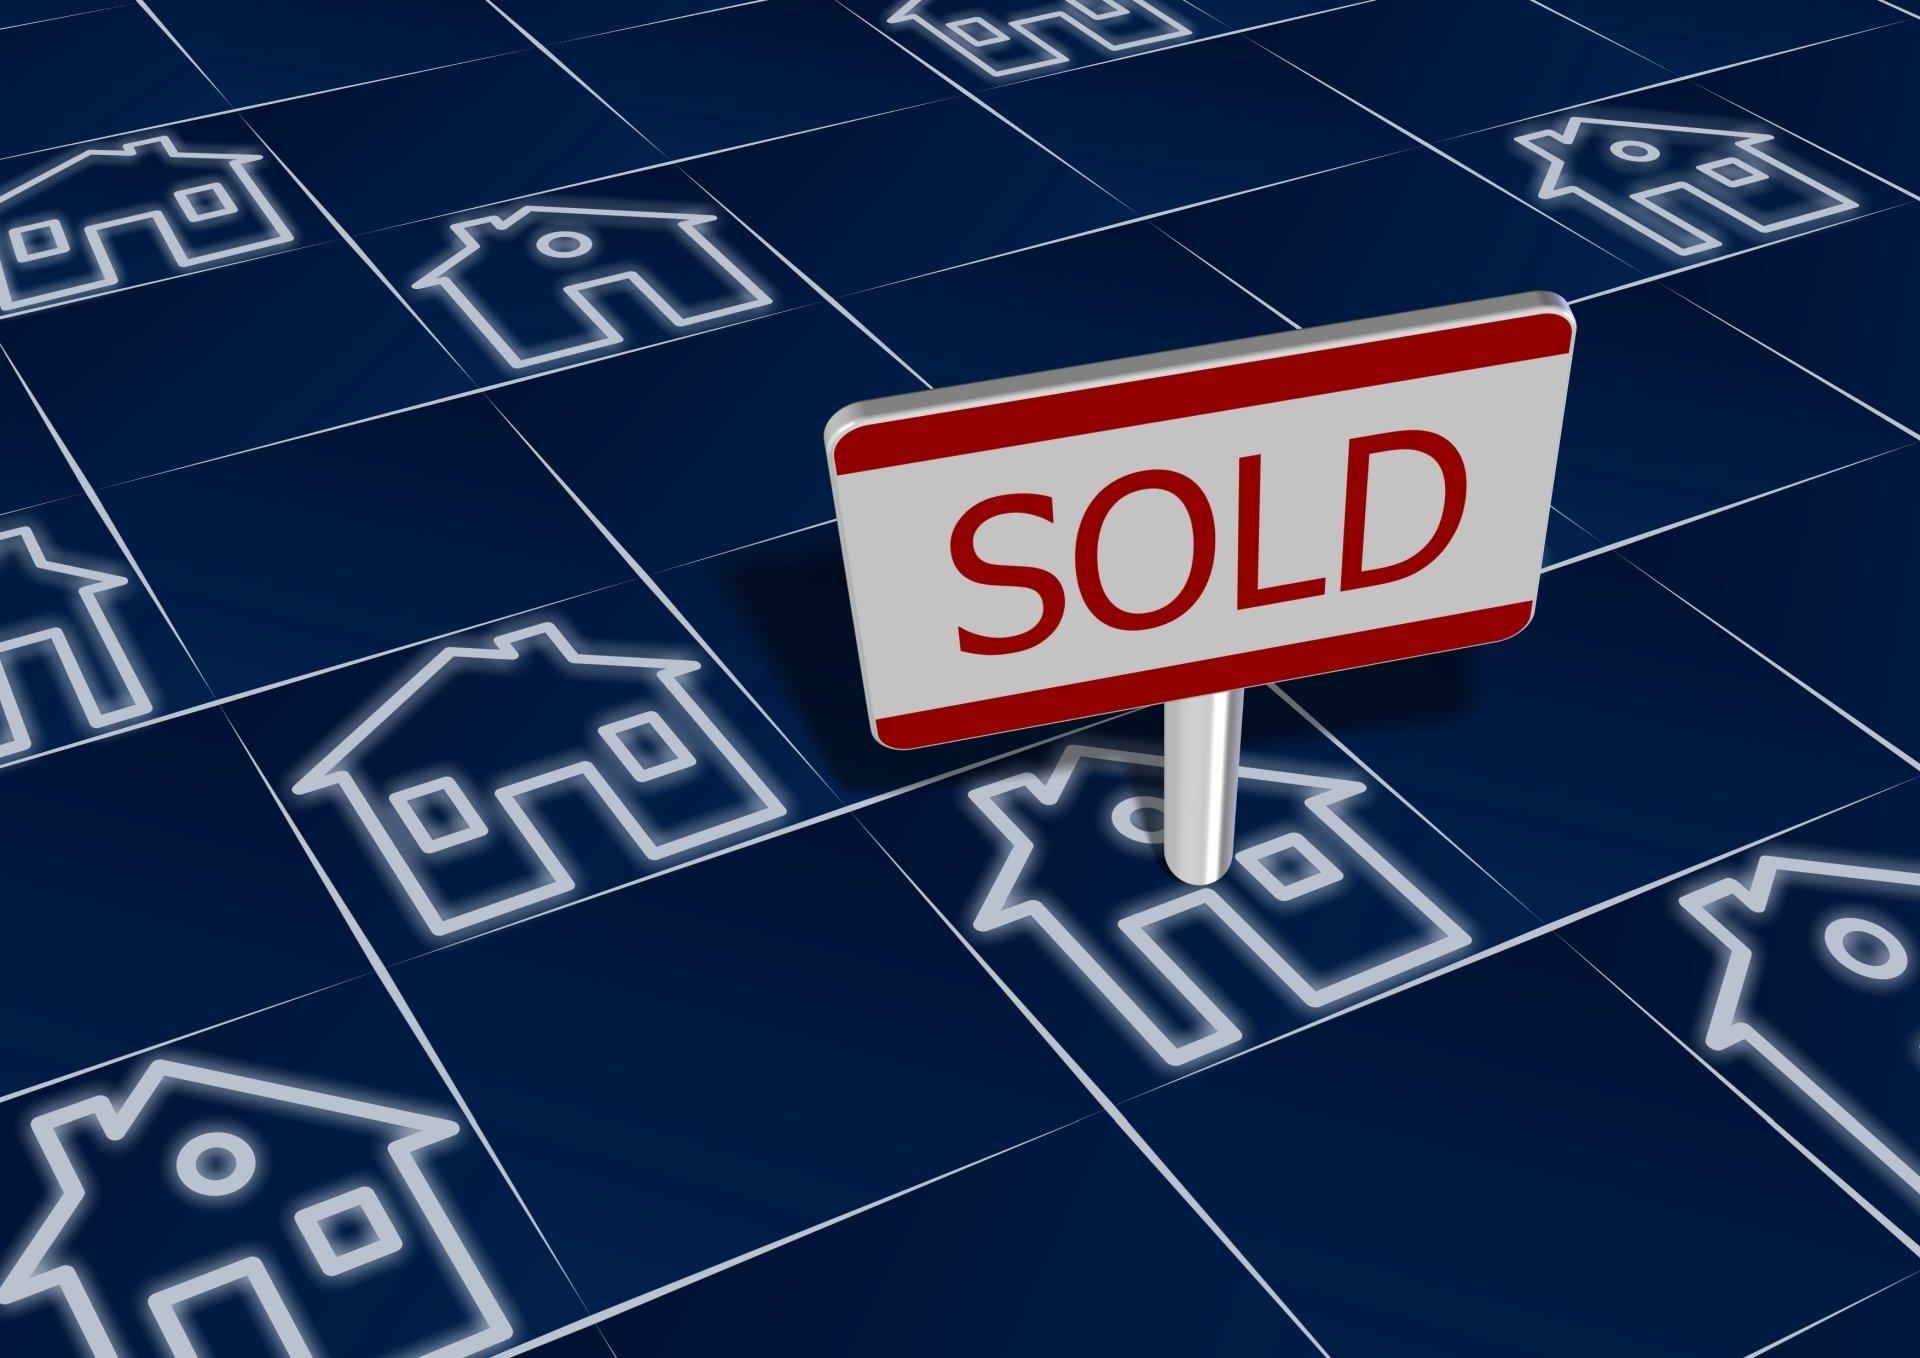 How to find a good real estate deal